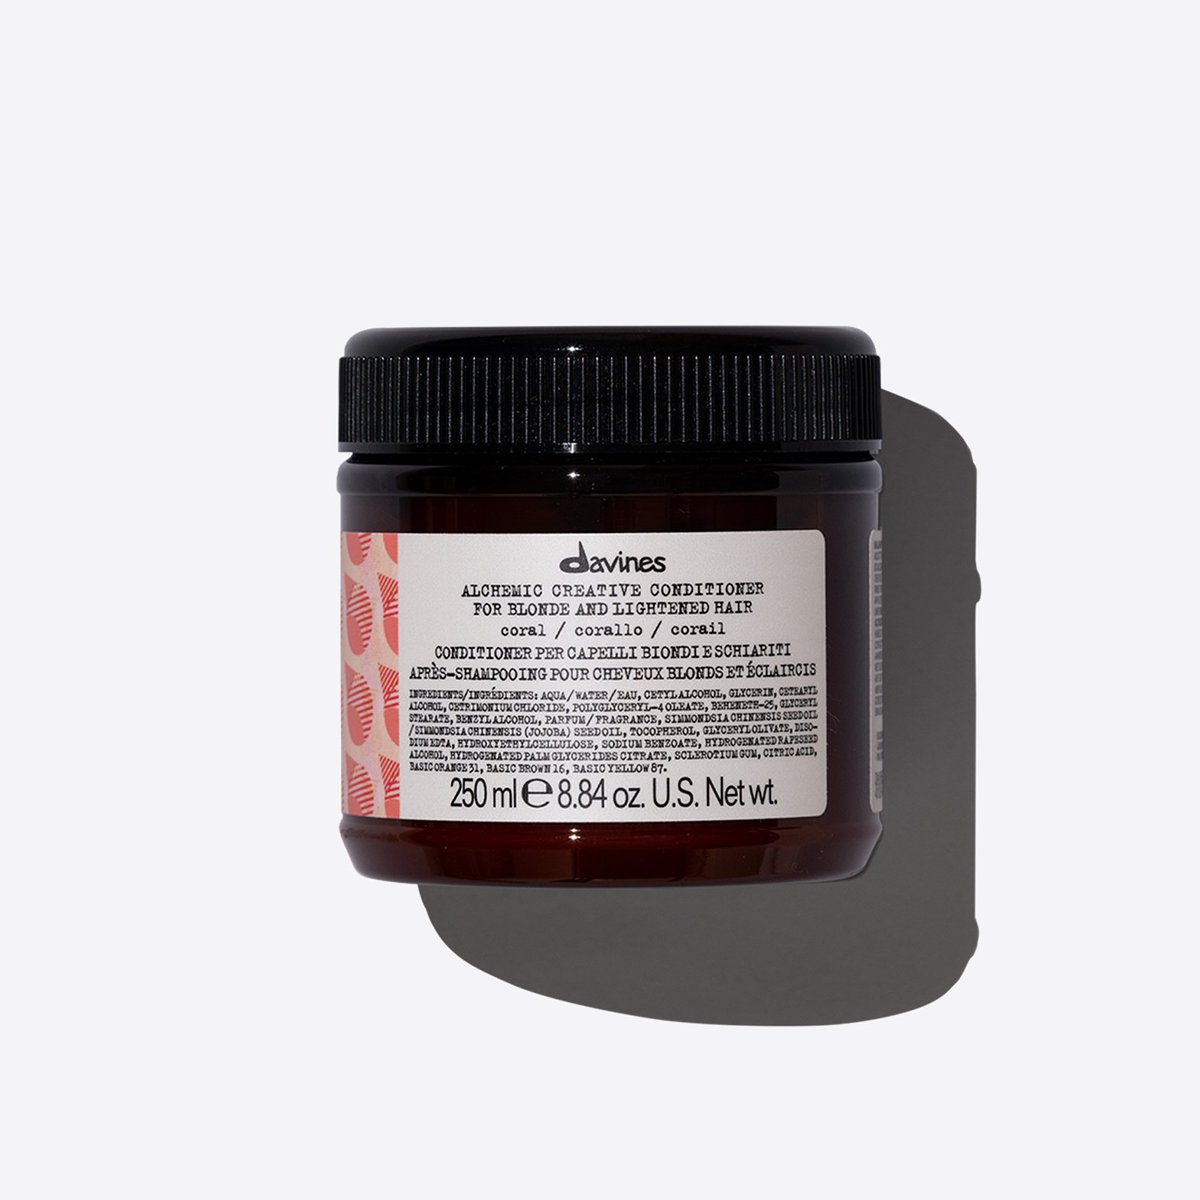 Davines Creative Conditioner - Coral (For Light Hair)